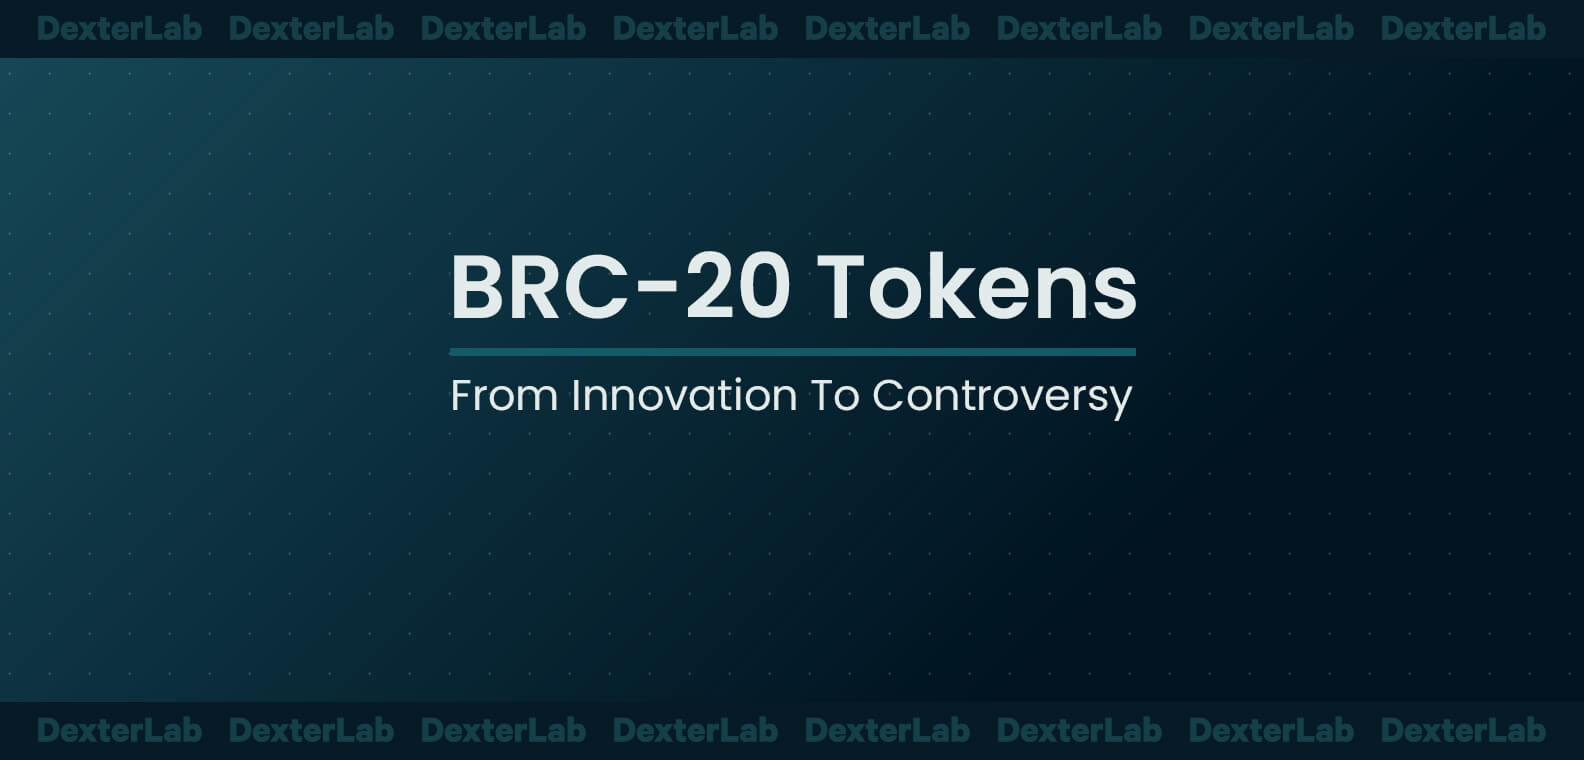 BRC-20 Tokens: From Innovation To Controversy